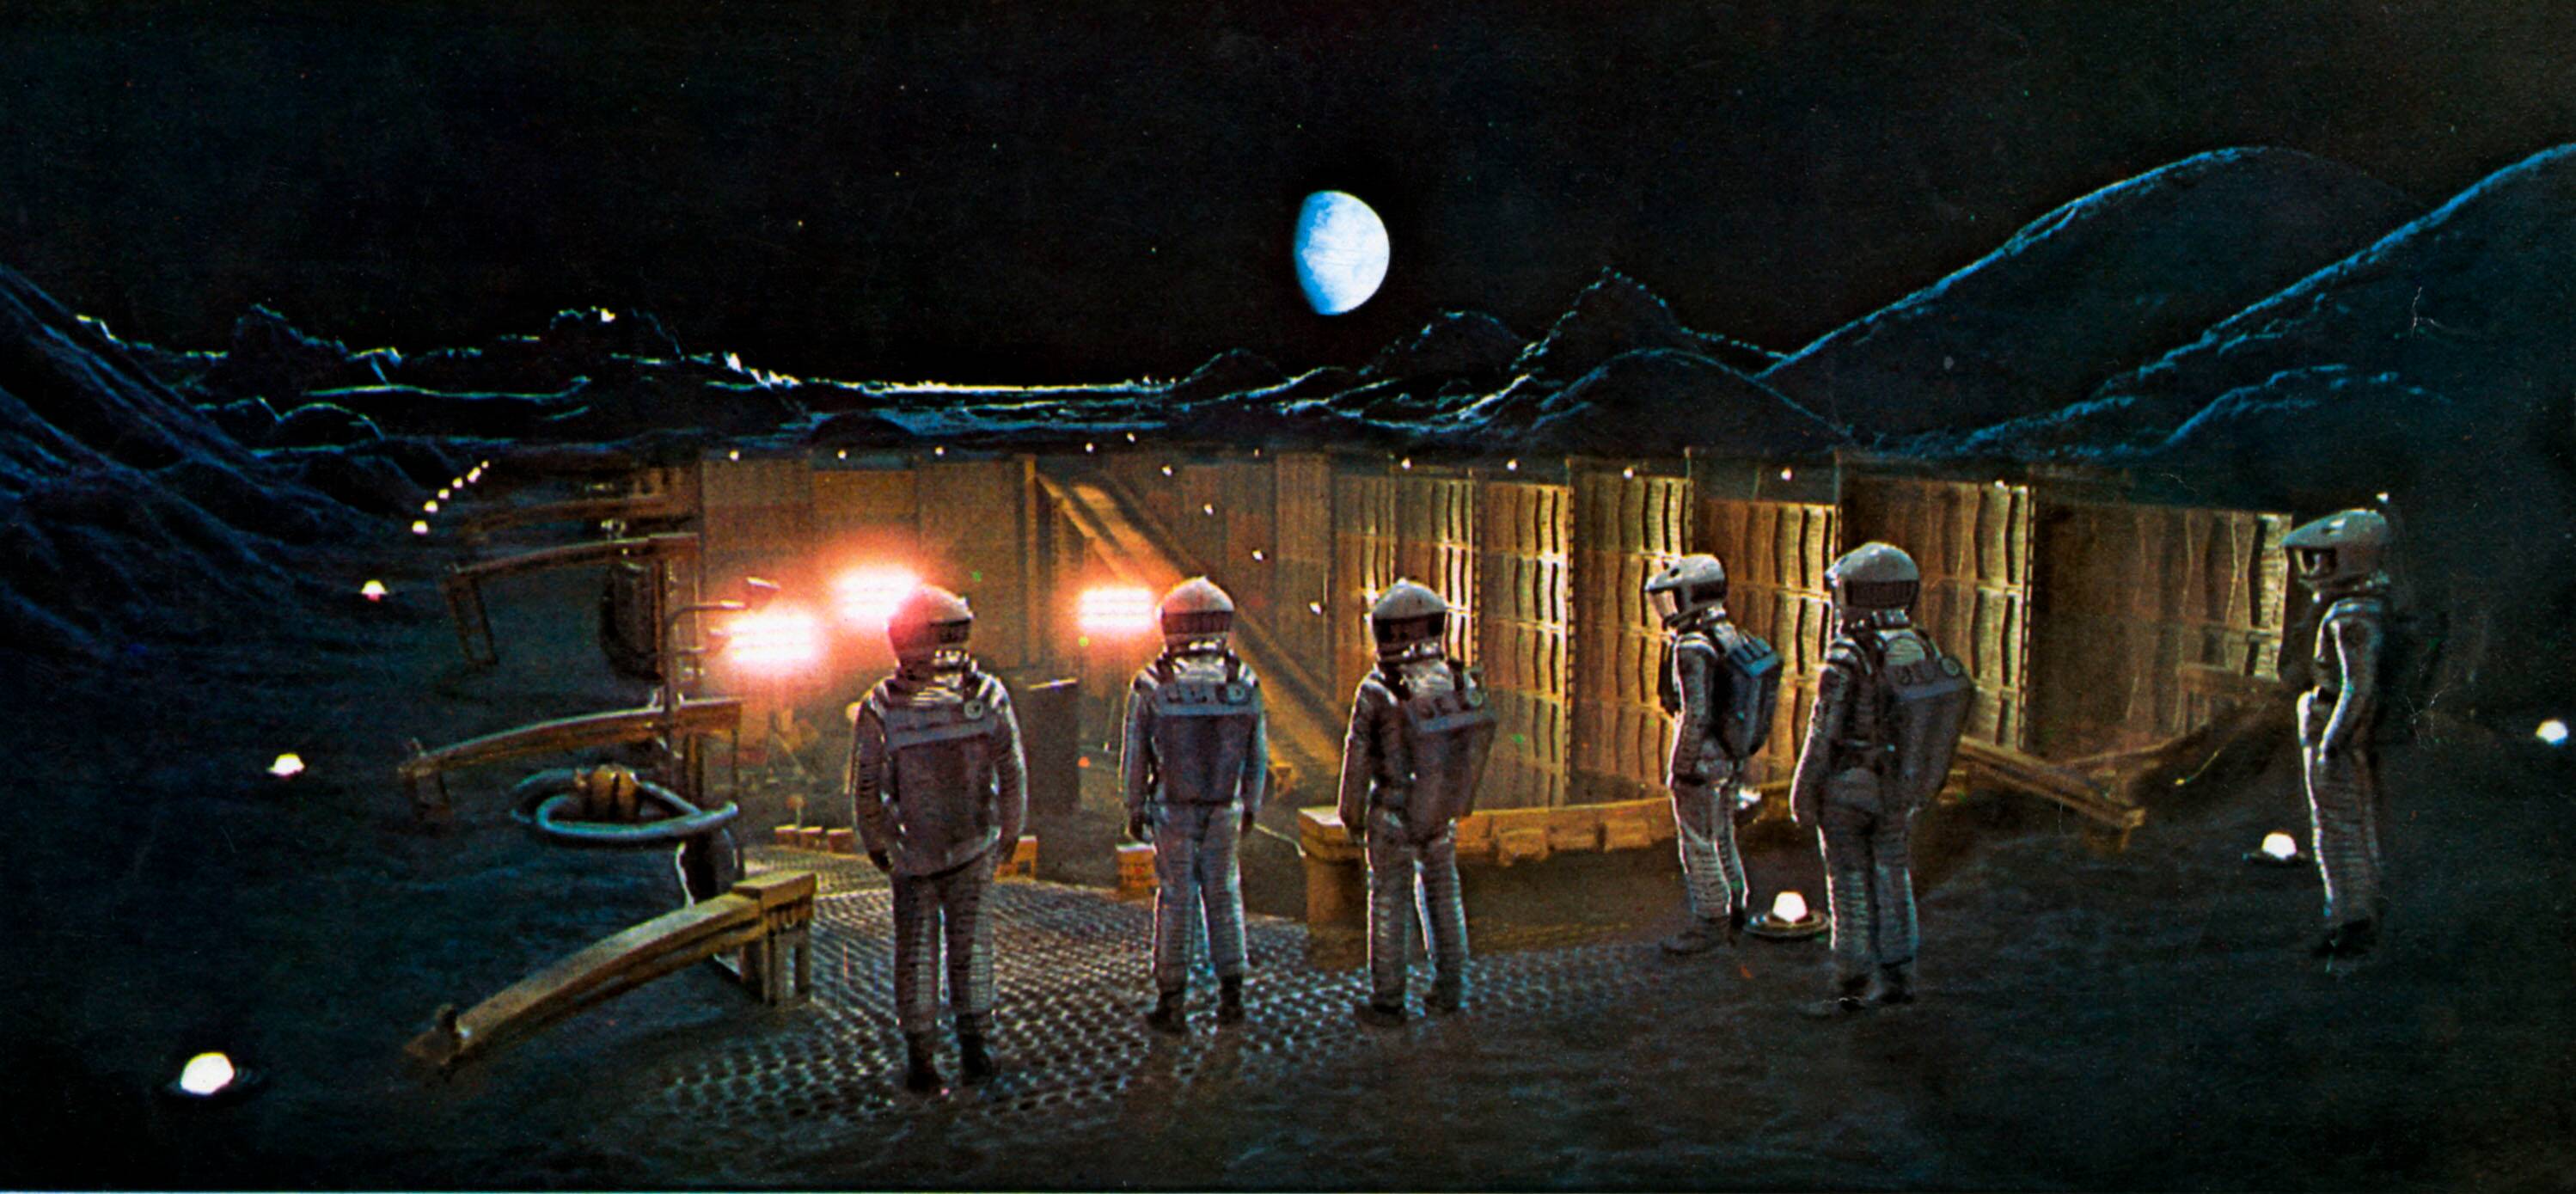 2001: A Space Odyssey | Oscars.org | Academy of Motion Picture Arts and Sciences2997 x 1389